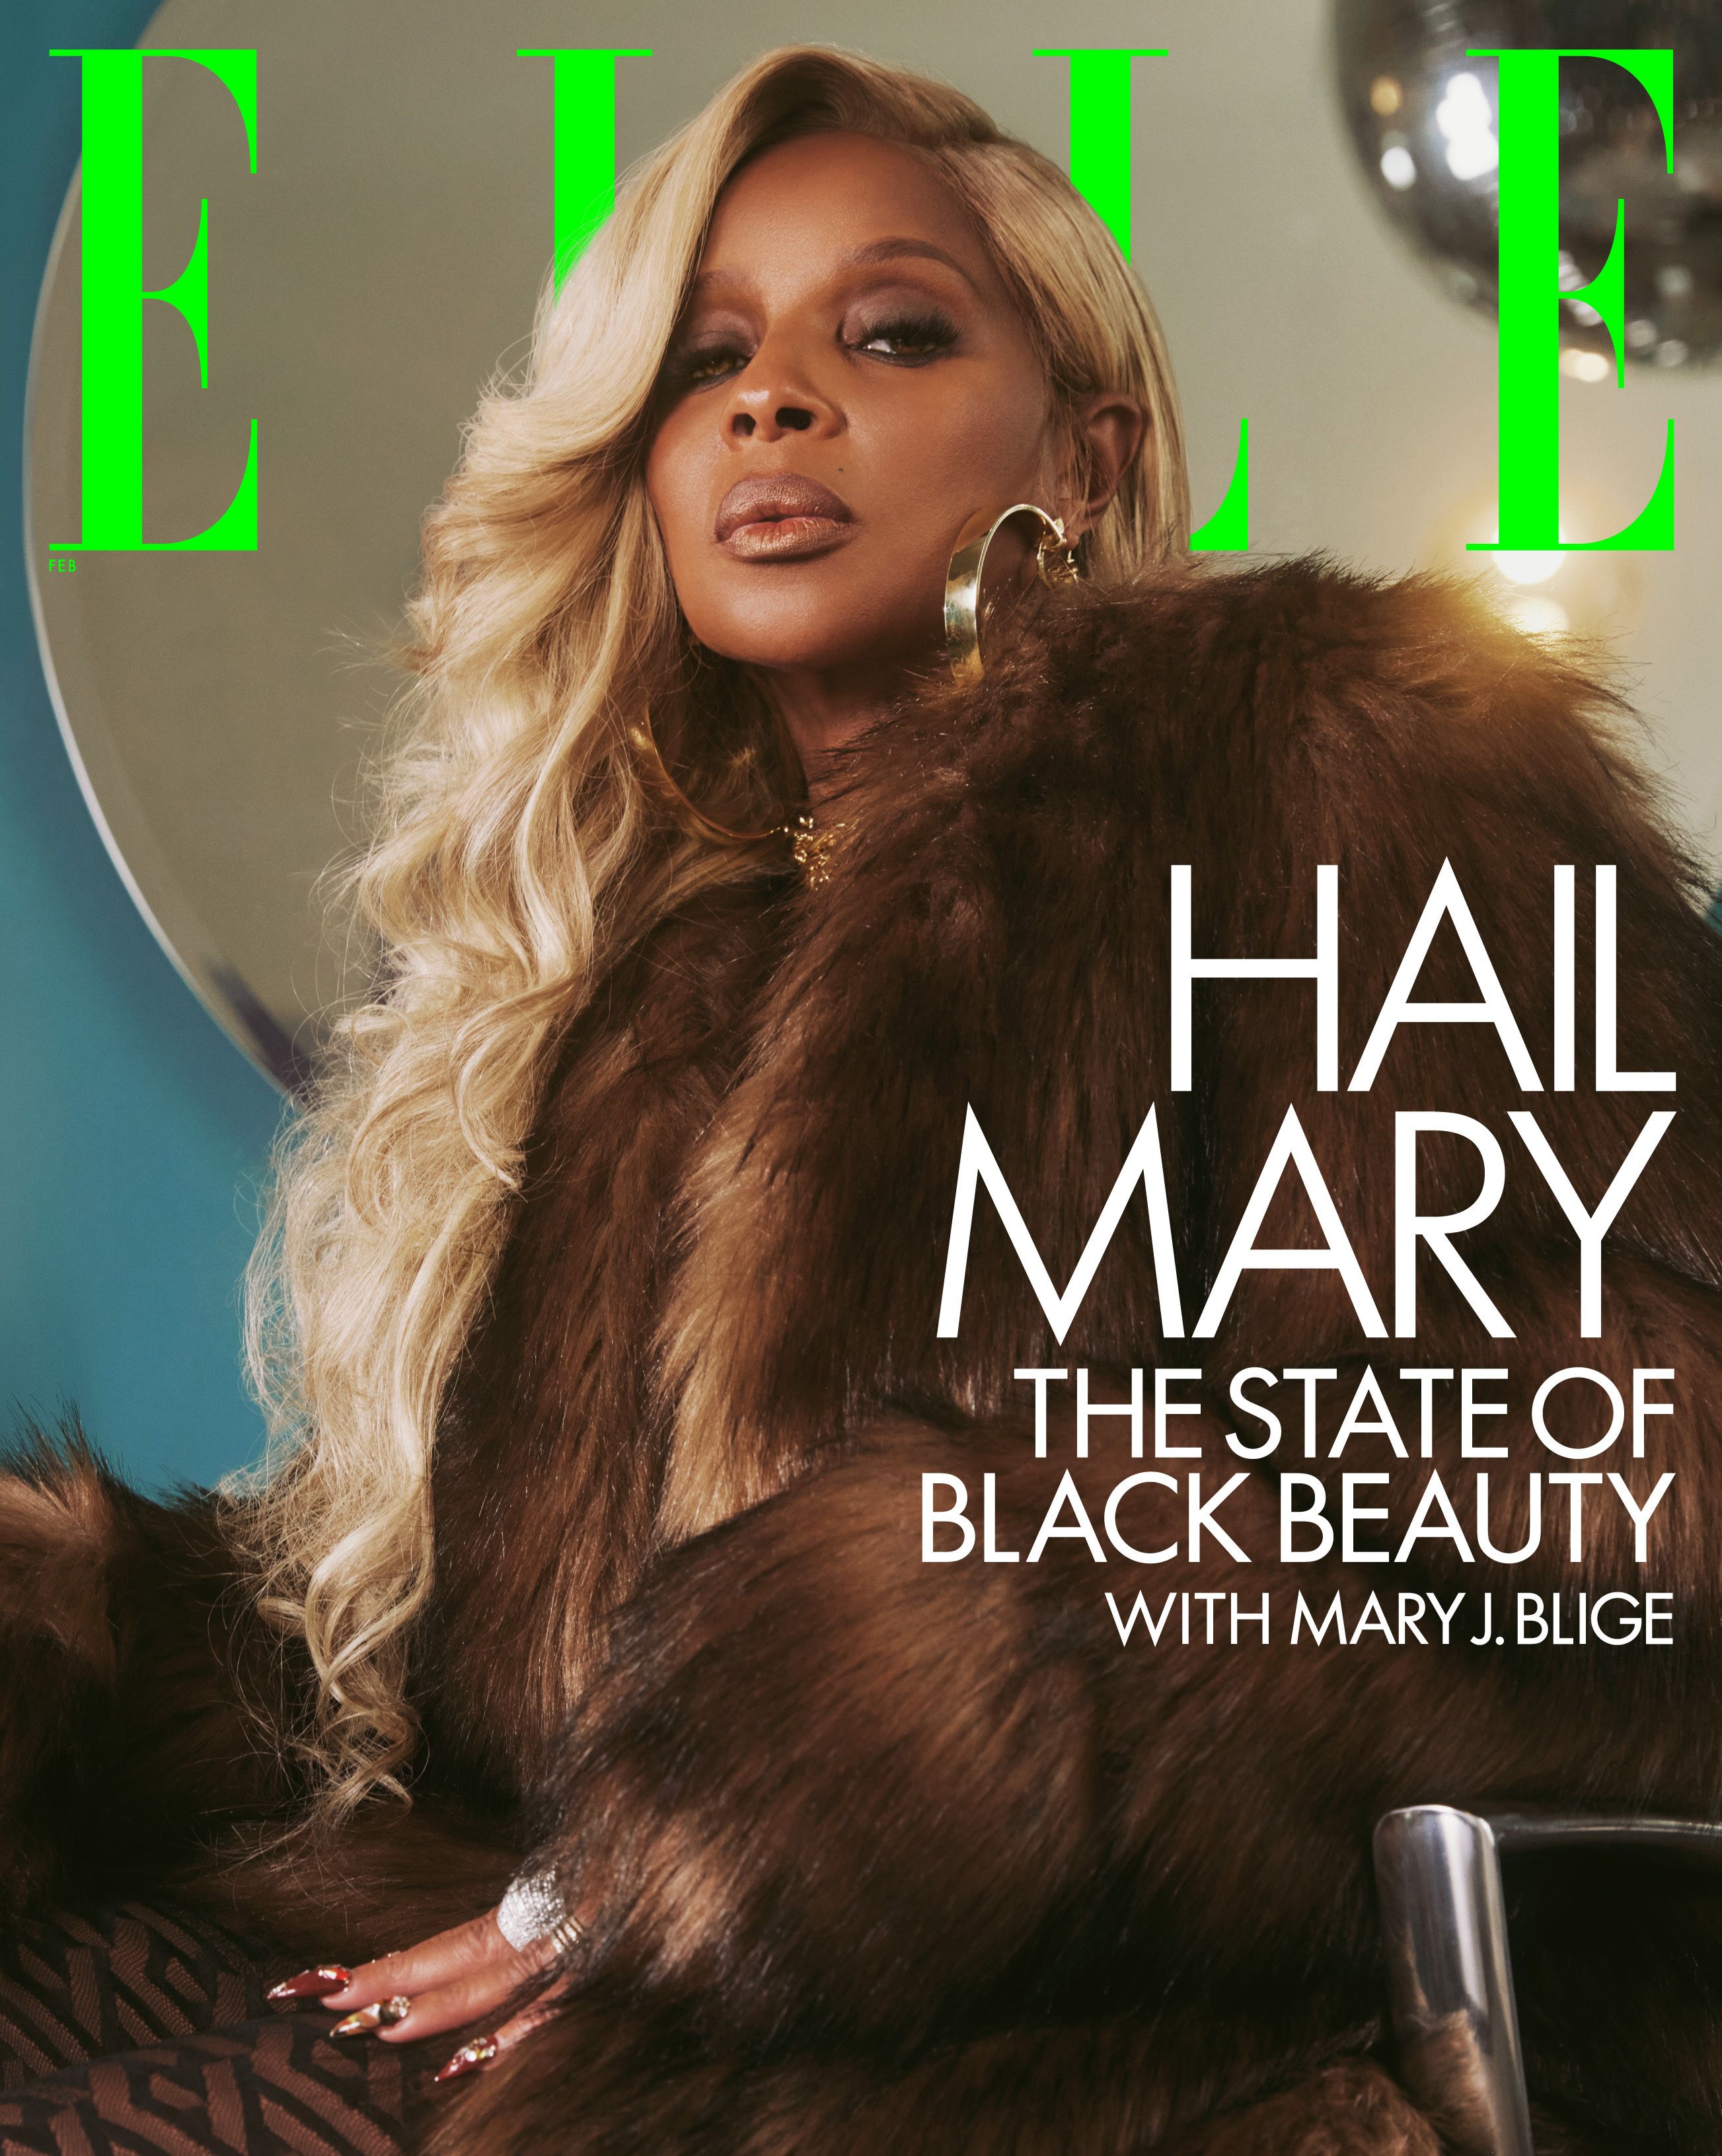 Mary J Blige Porn - Mary J. Blige on Navigating Self-Acceptance Through Beauty